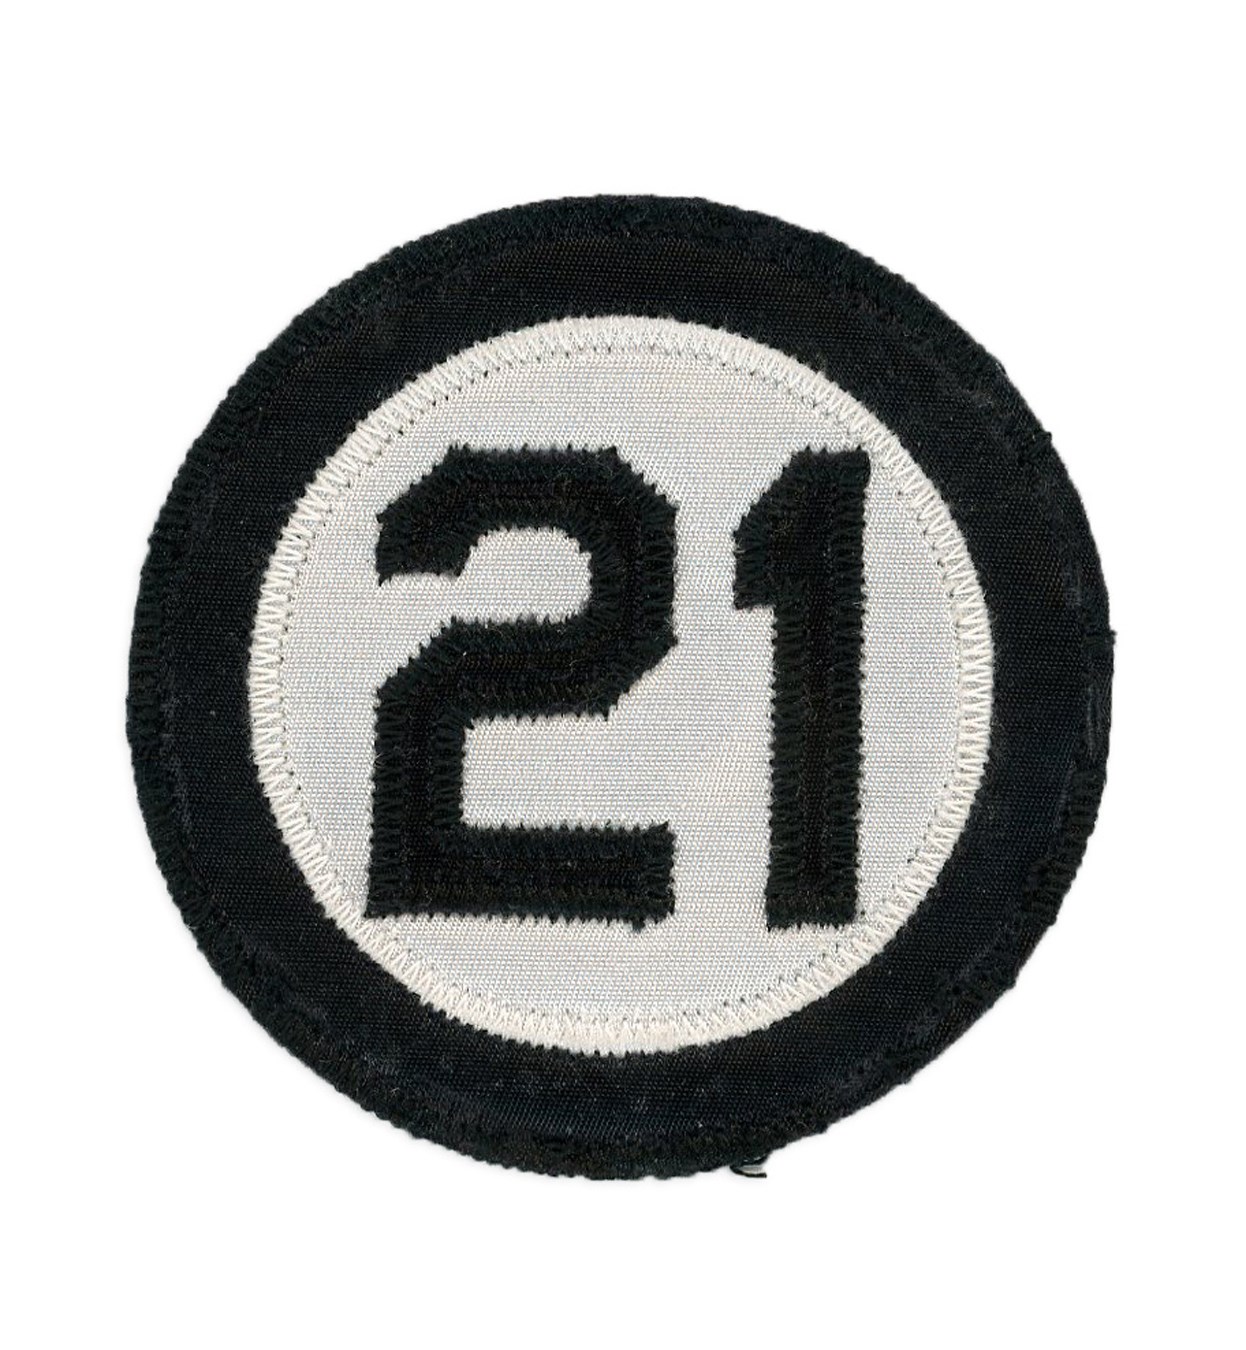 Clemente and Pittsburgh Pirates - 1973 Pittsburgh Pirates Roberto Clemente "21" Memorial Patch